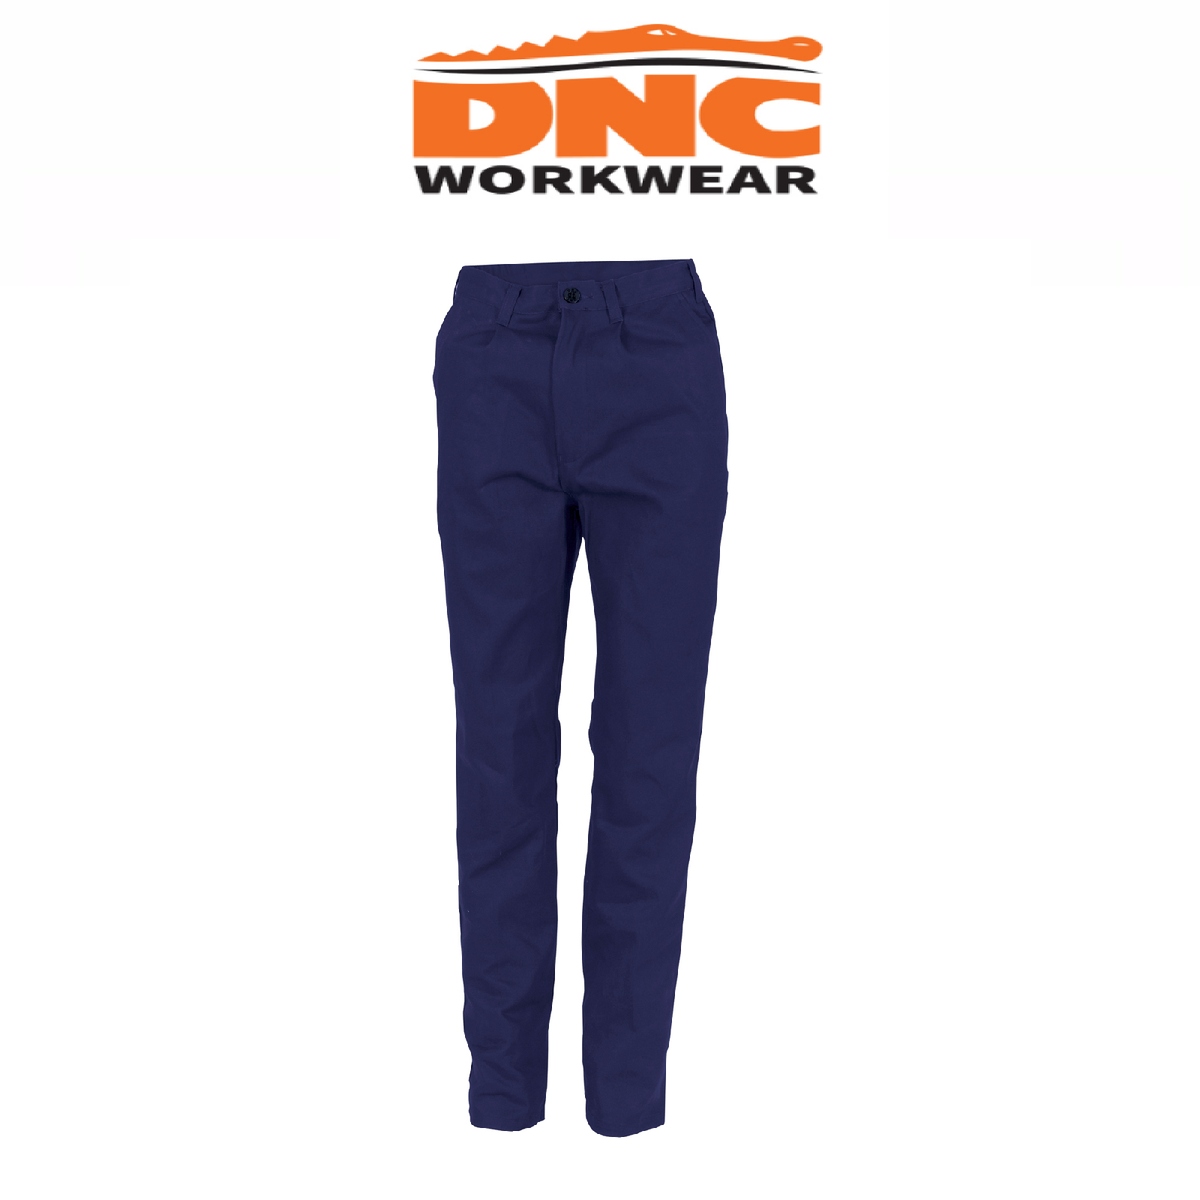 DNC Workwear Ladies Cotton Drill Work Pants Flame Comfortable Pant Work 3321